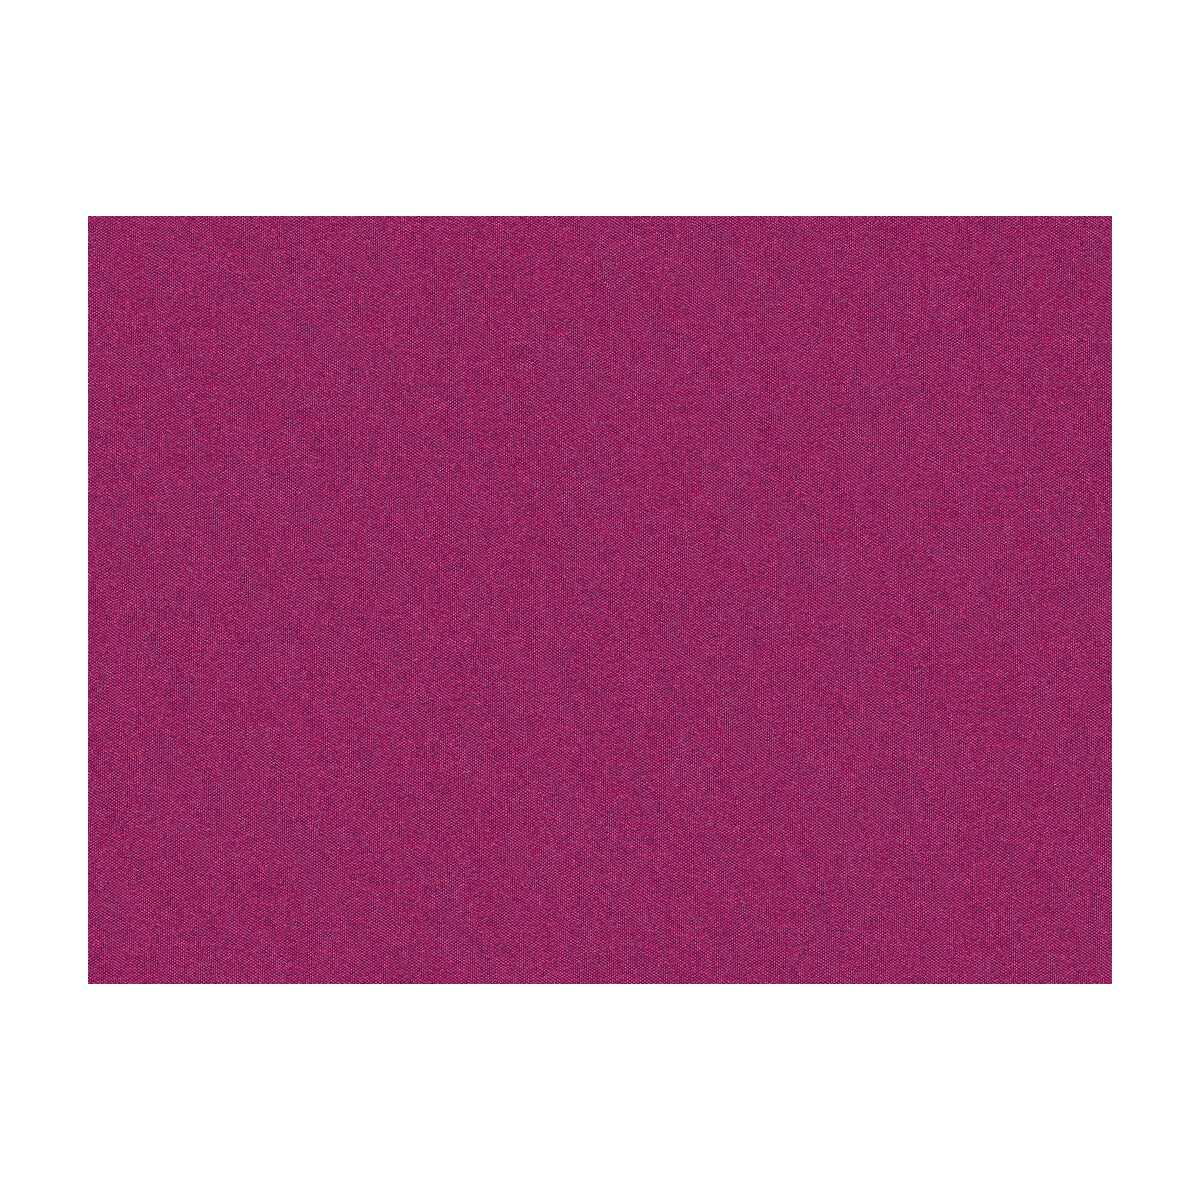 Shots fabric in merlot color - pattern JAG-50020.97.0 - by Brunschwig &amp; Fils in the Jagtar collection